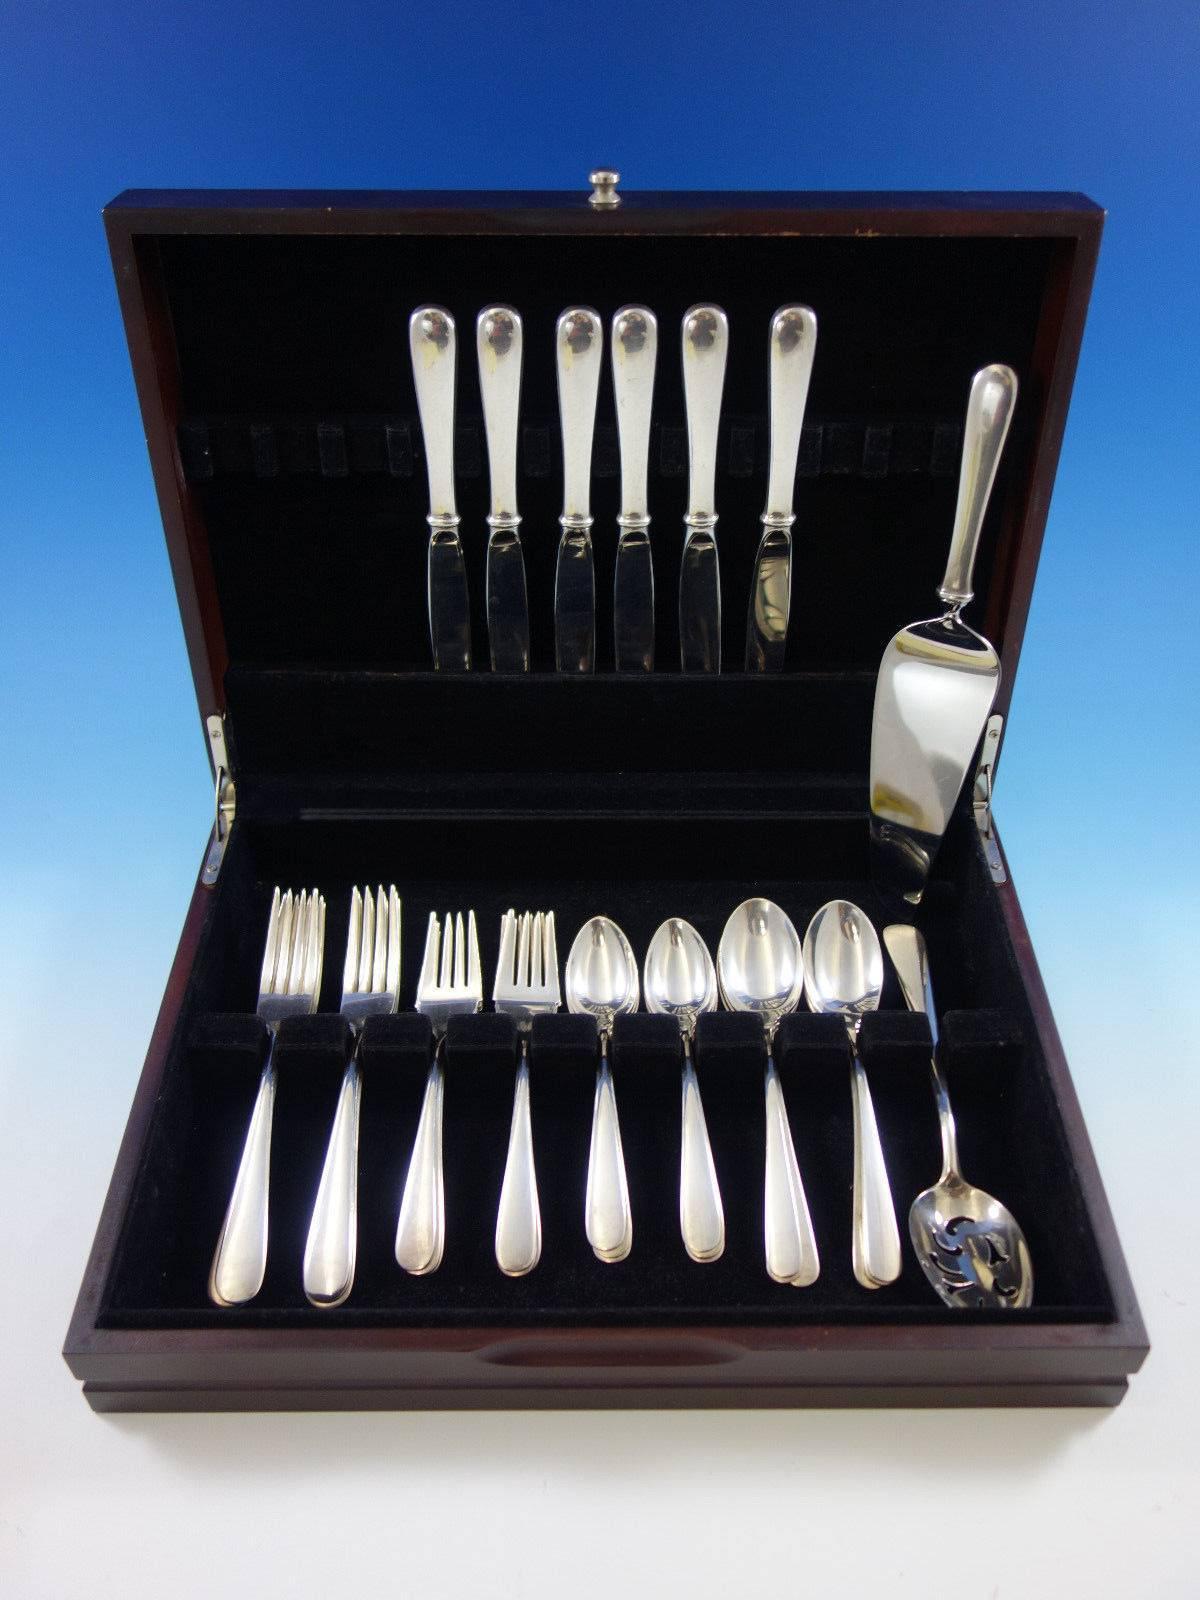 Old Maryland Plain by Kirk sterling silver flatware set, 32 pieces. Great starter set in a highly desirable pattern! This set includes: Six knives, 8 7/8